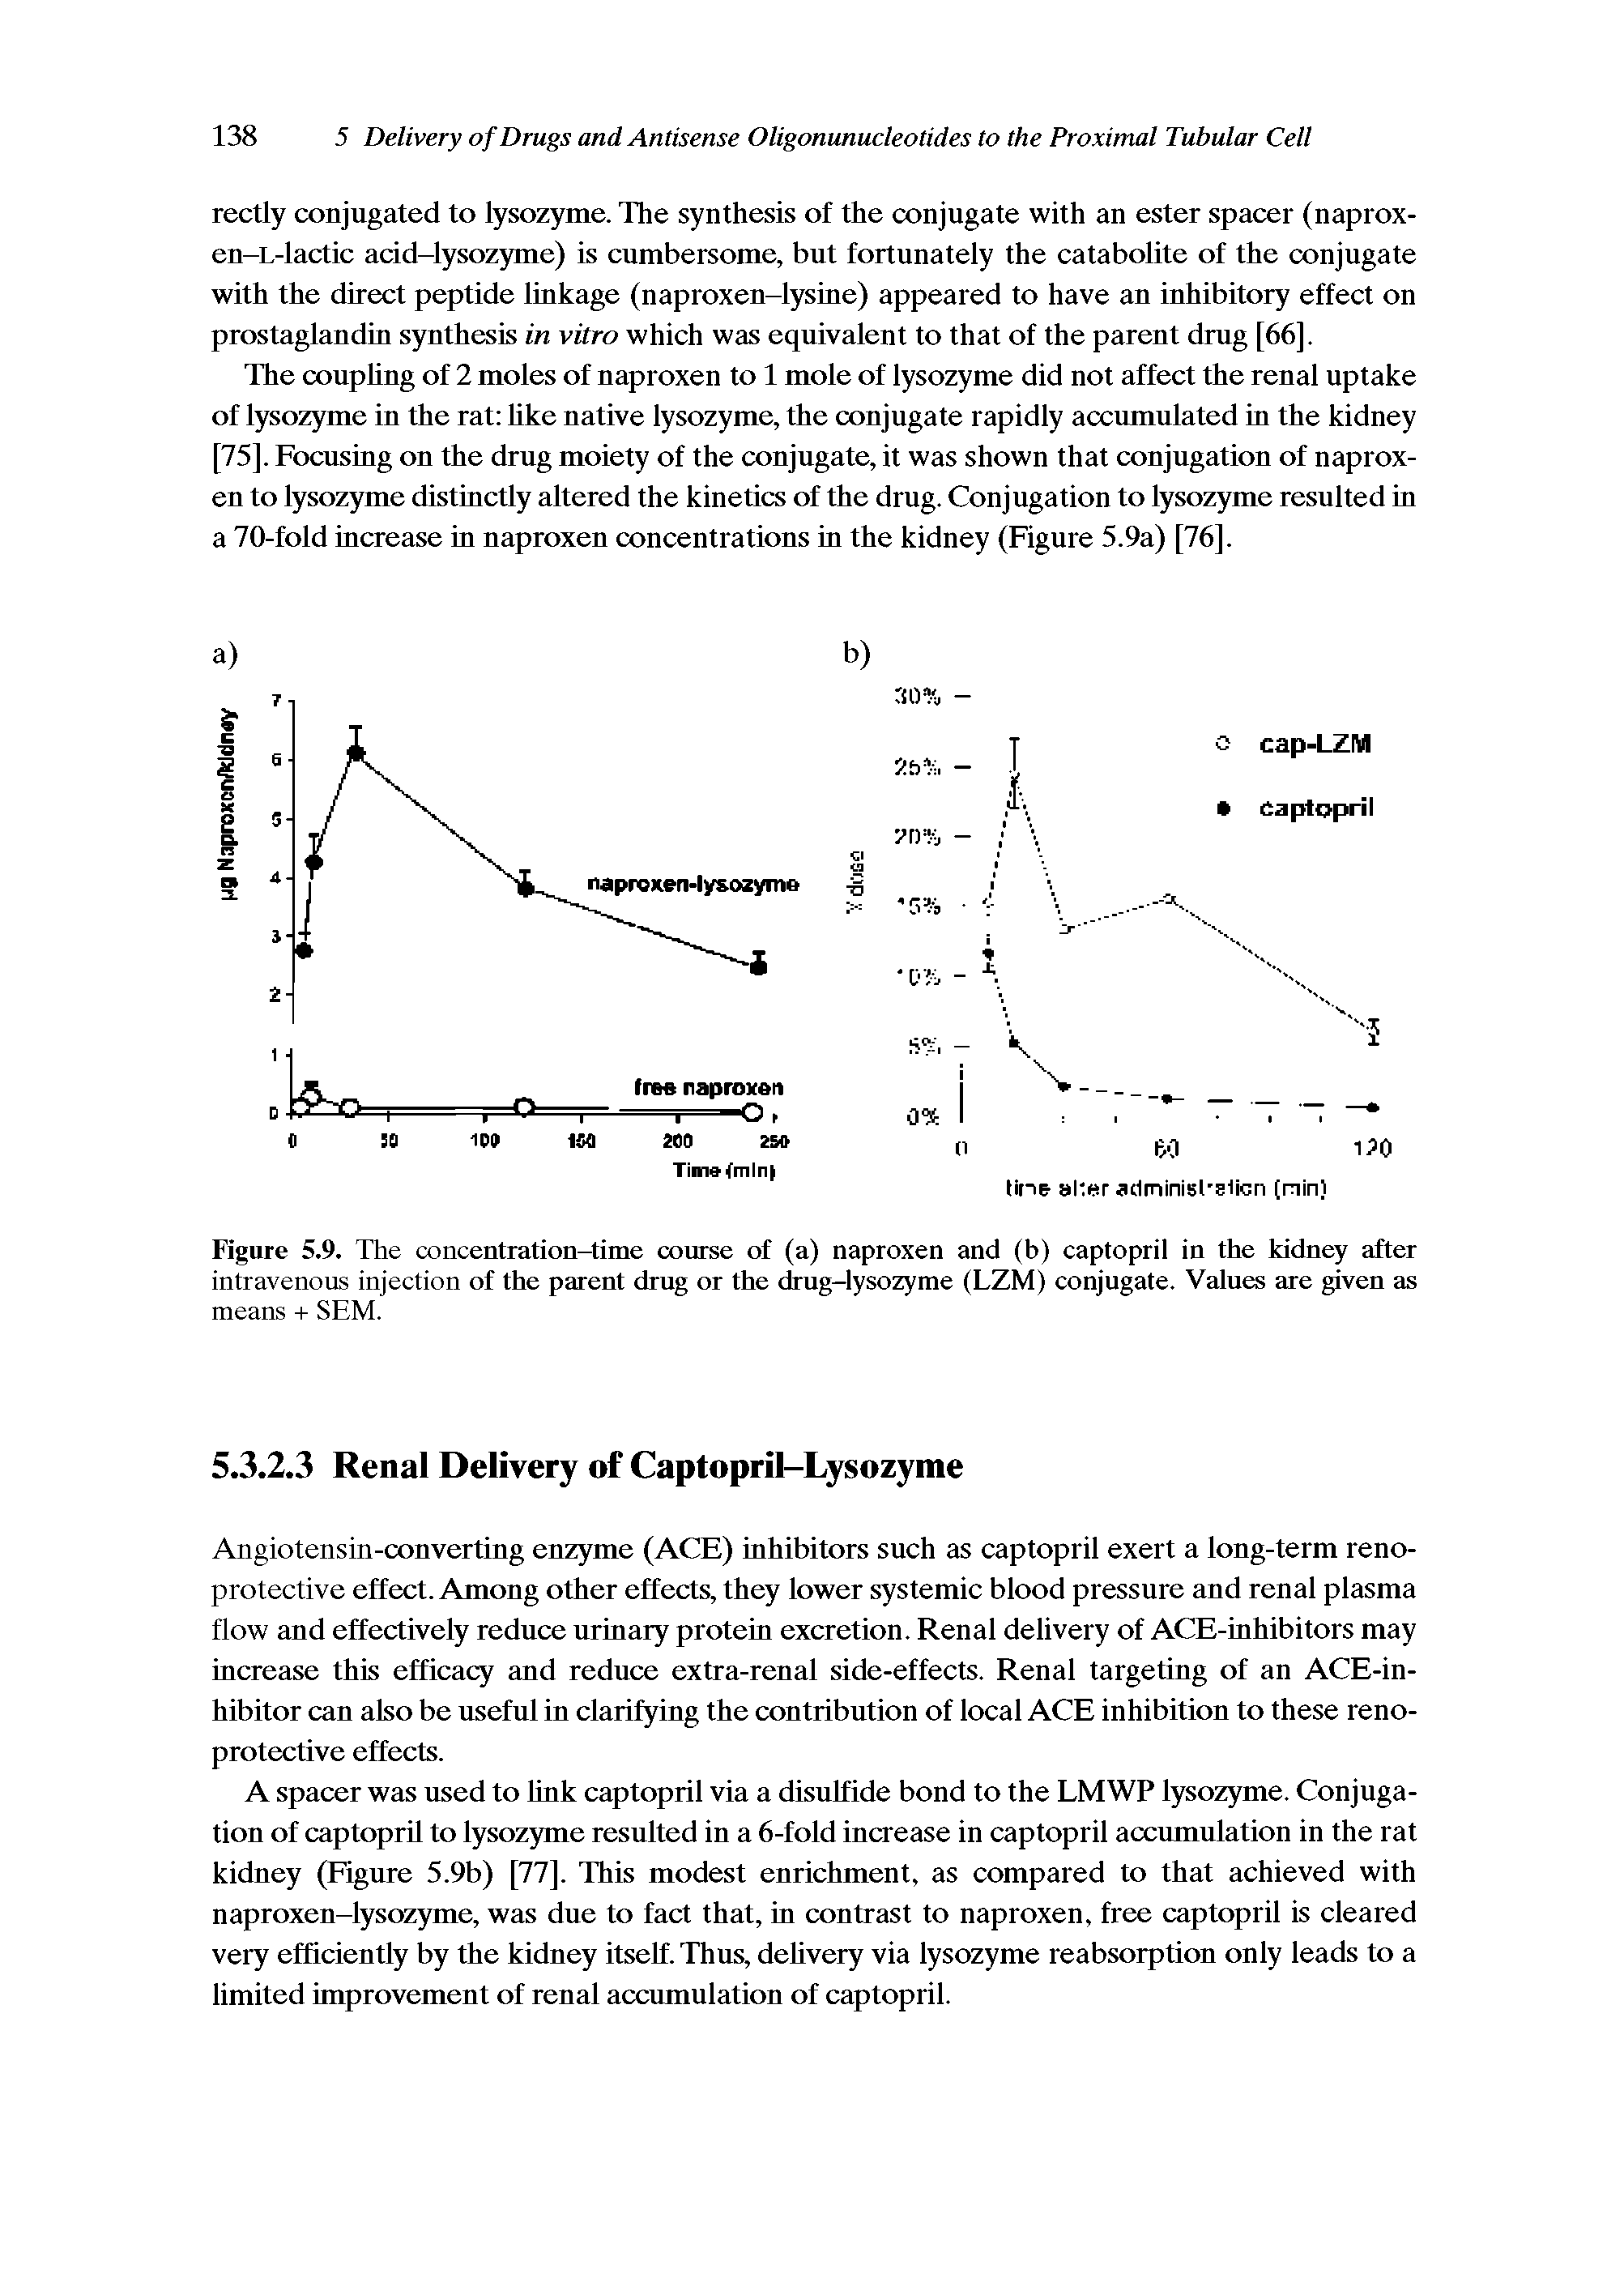 Figure 5.9. The concentration-time course of (a) naproxen and (b) captopril in the kidney after intravenous injection of the parent drug or the drug-lysozyme (LZM) conjugate. Values are given as means + SEM.